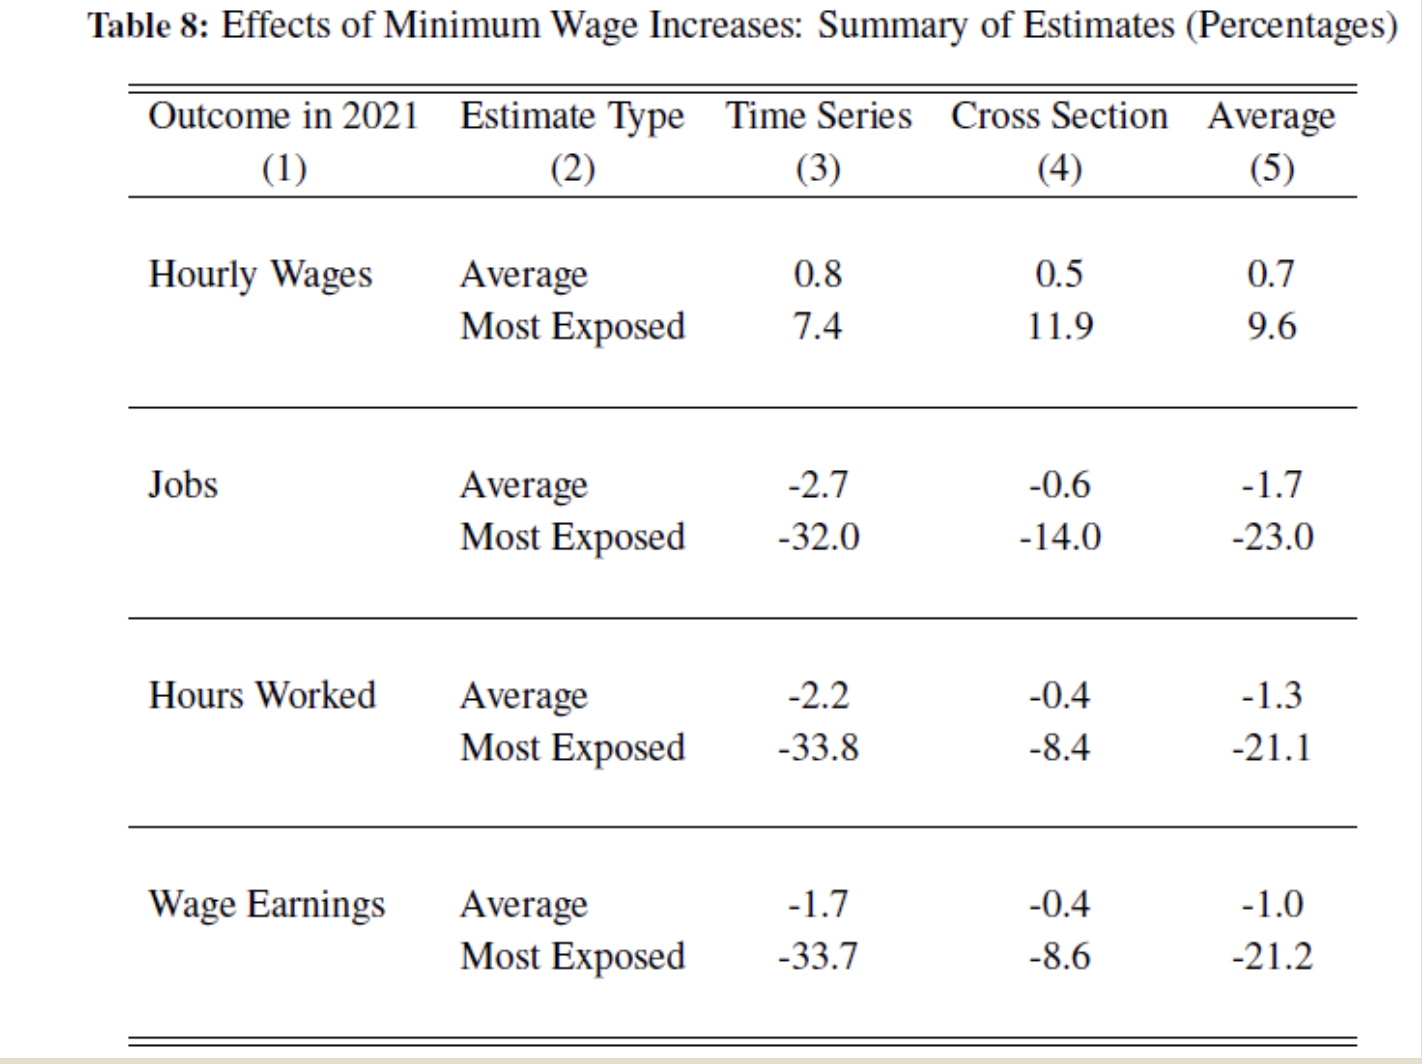 Effects_of_Minimum_Wage_Increases.png